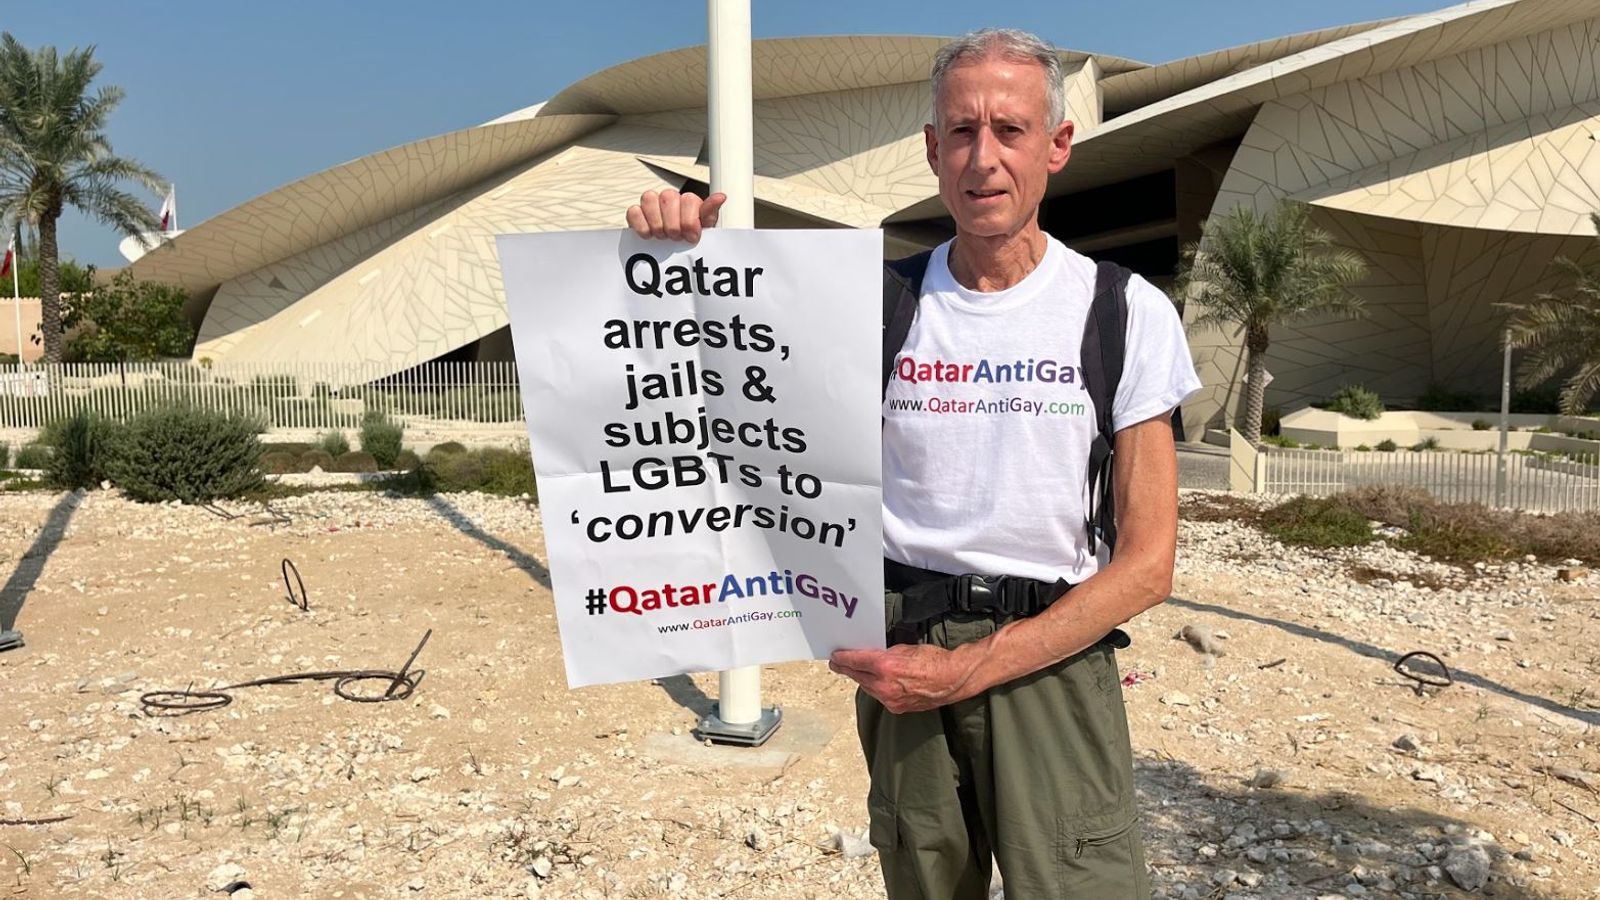 British LGBT activist Peter Tatchell stopped during World Cup protest in Qatar 